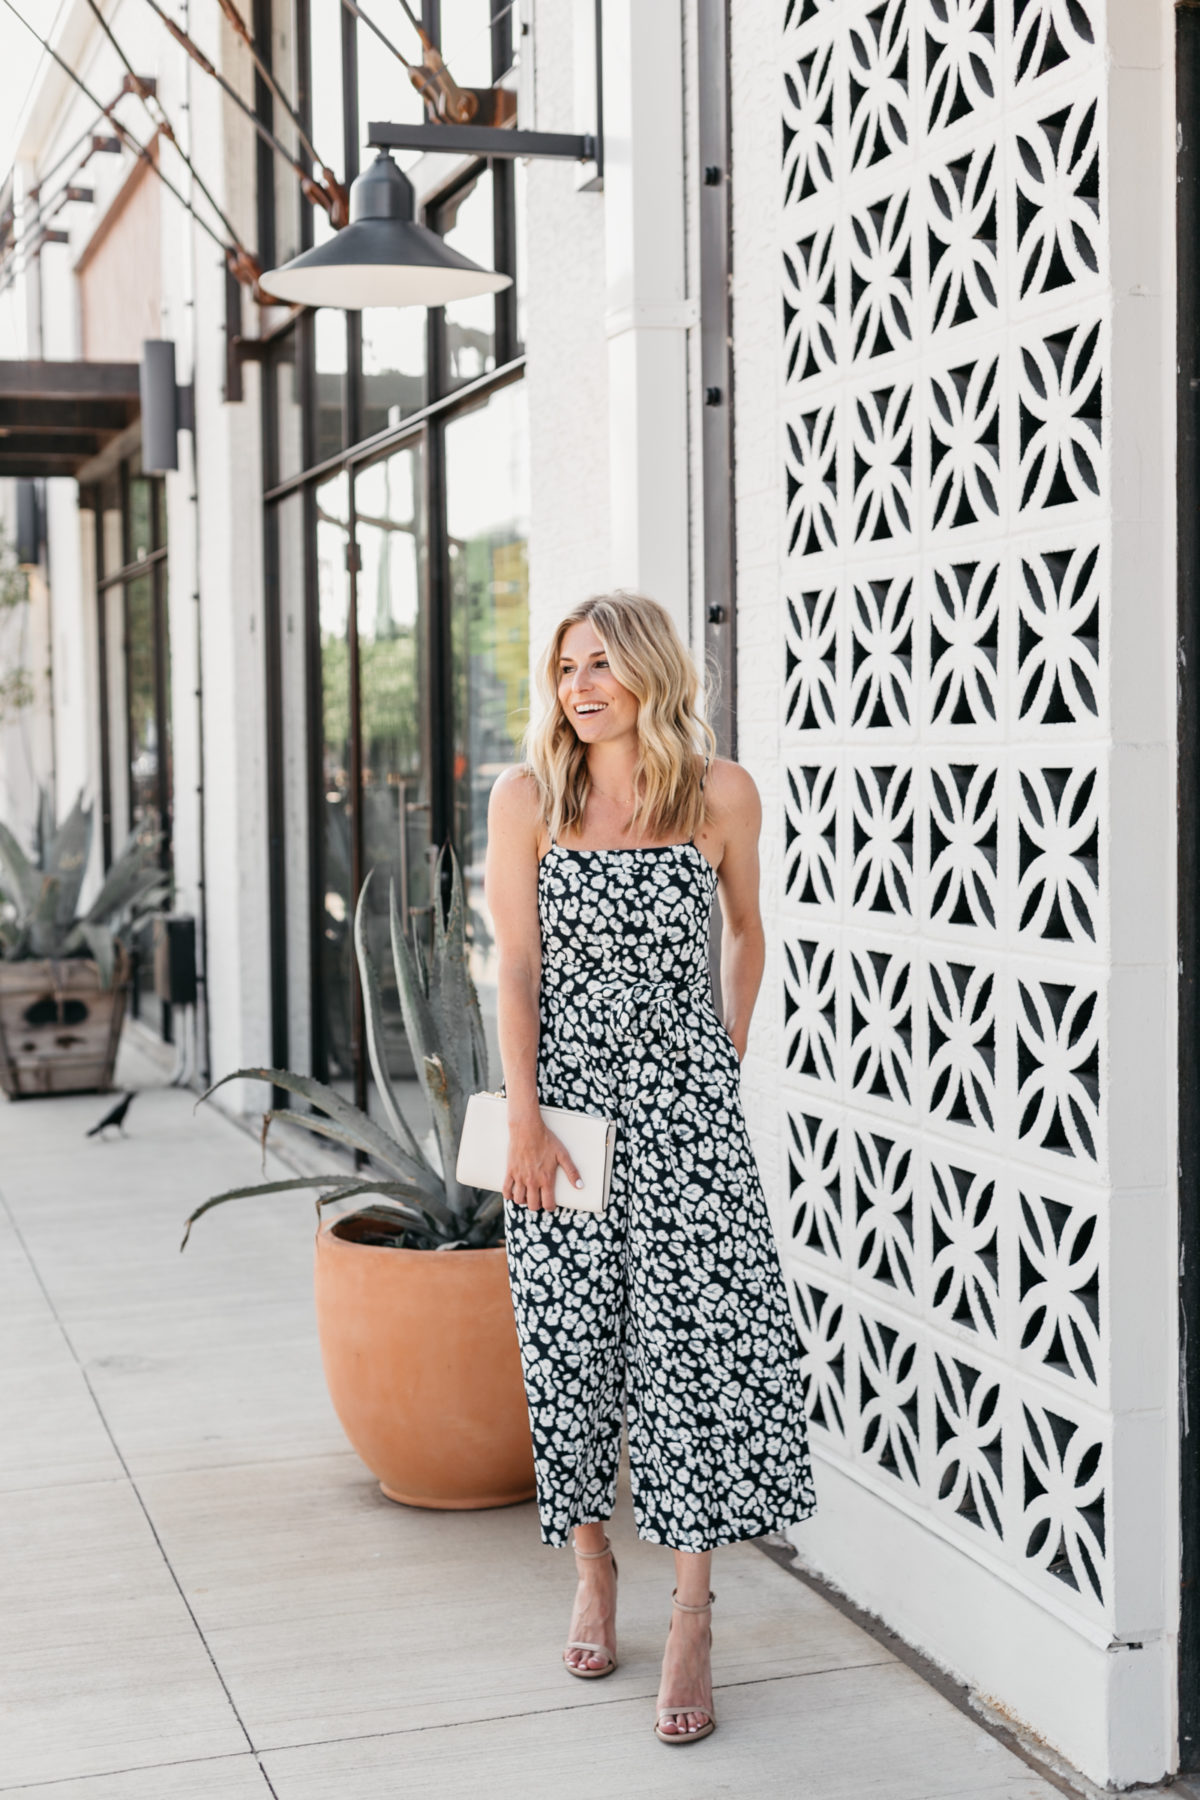 SUMMER STYLE WITH TOMMY BAHAMA – One Small Blonde